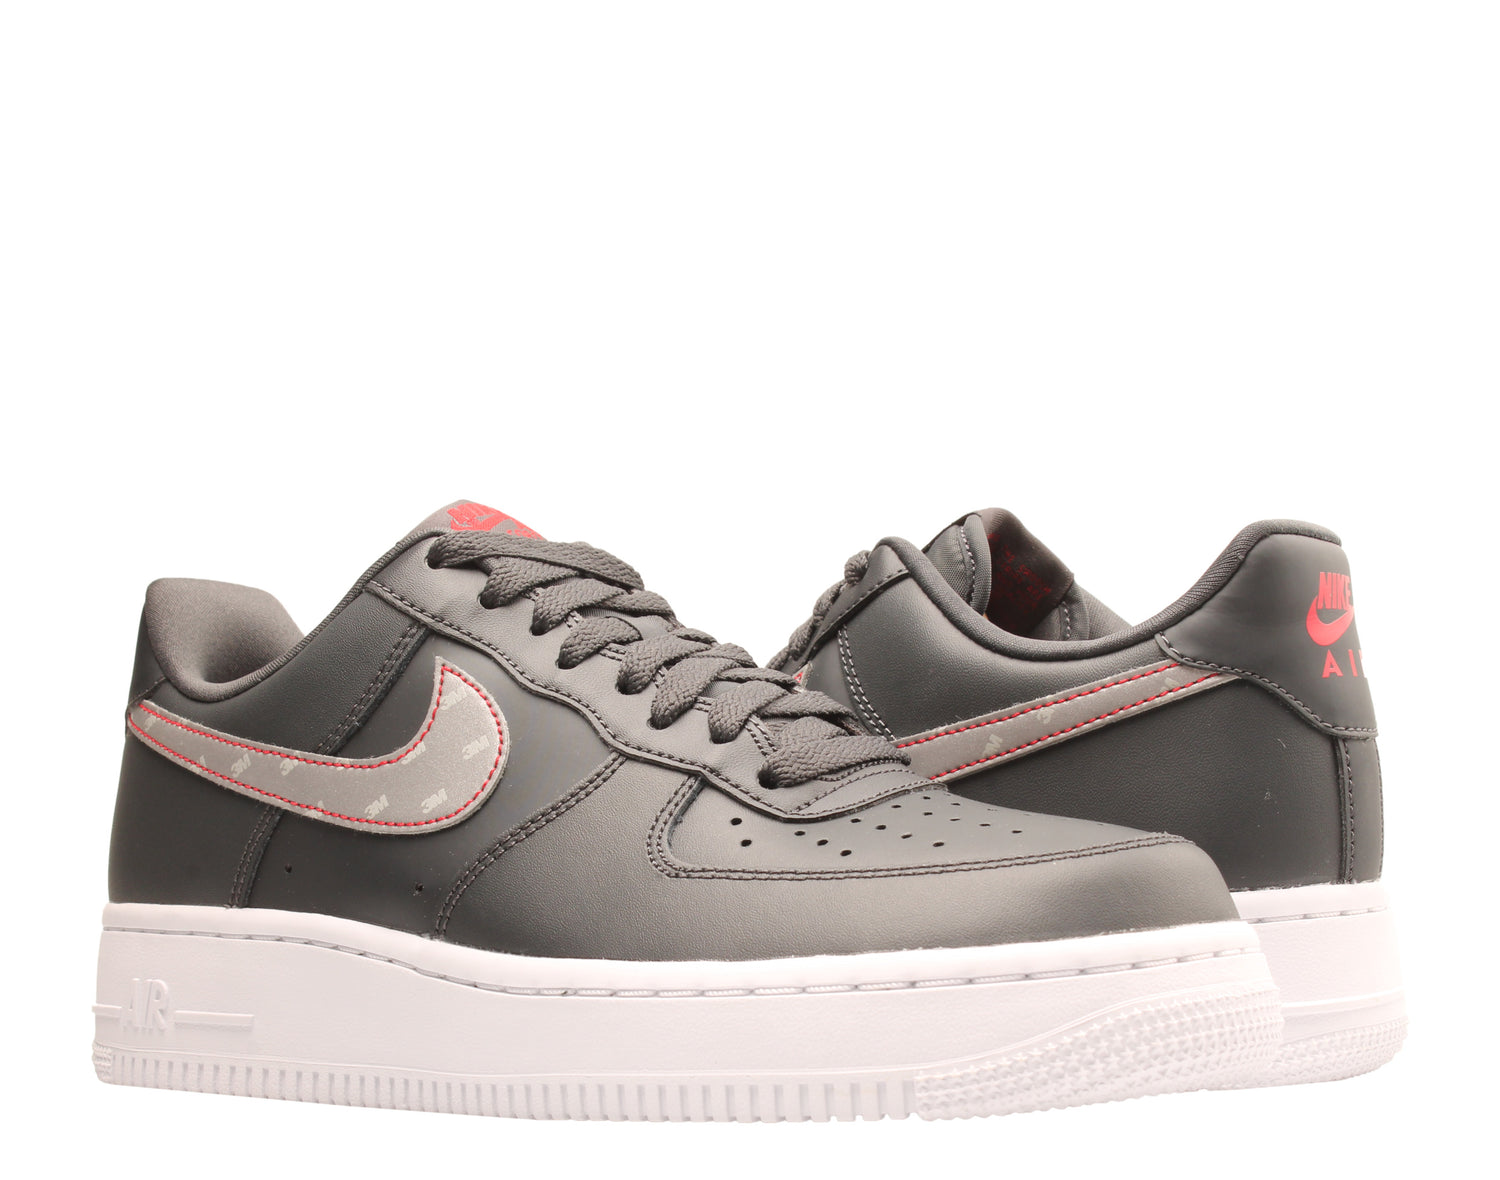 Nike Air Force 1 '07 3M Men's Basketball Shoes